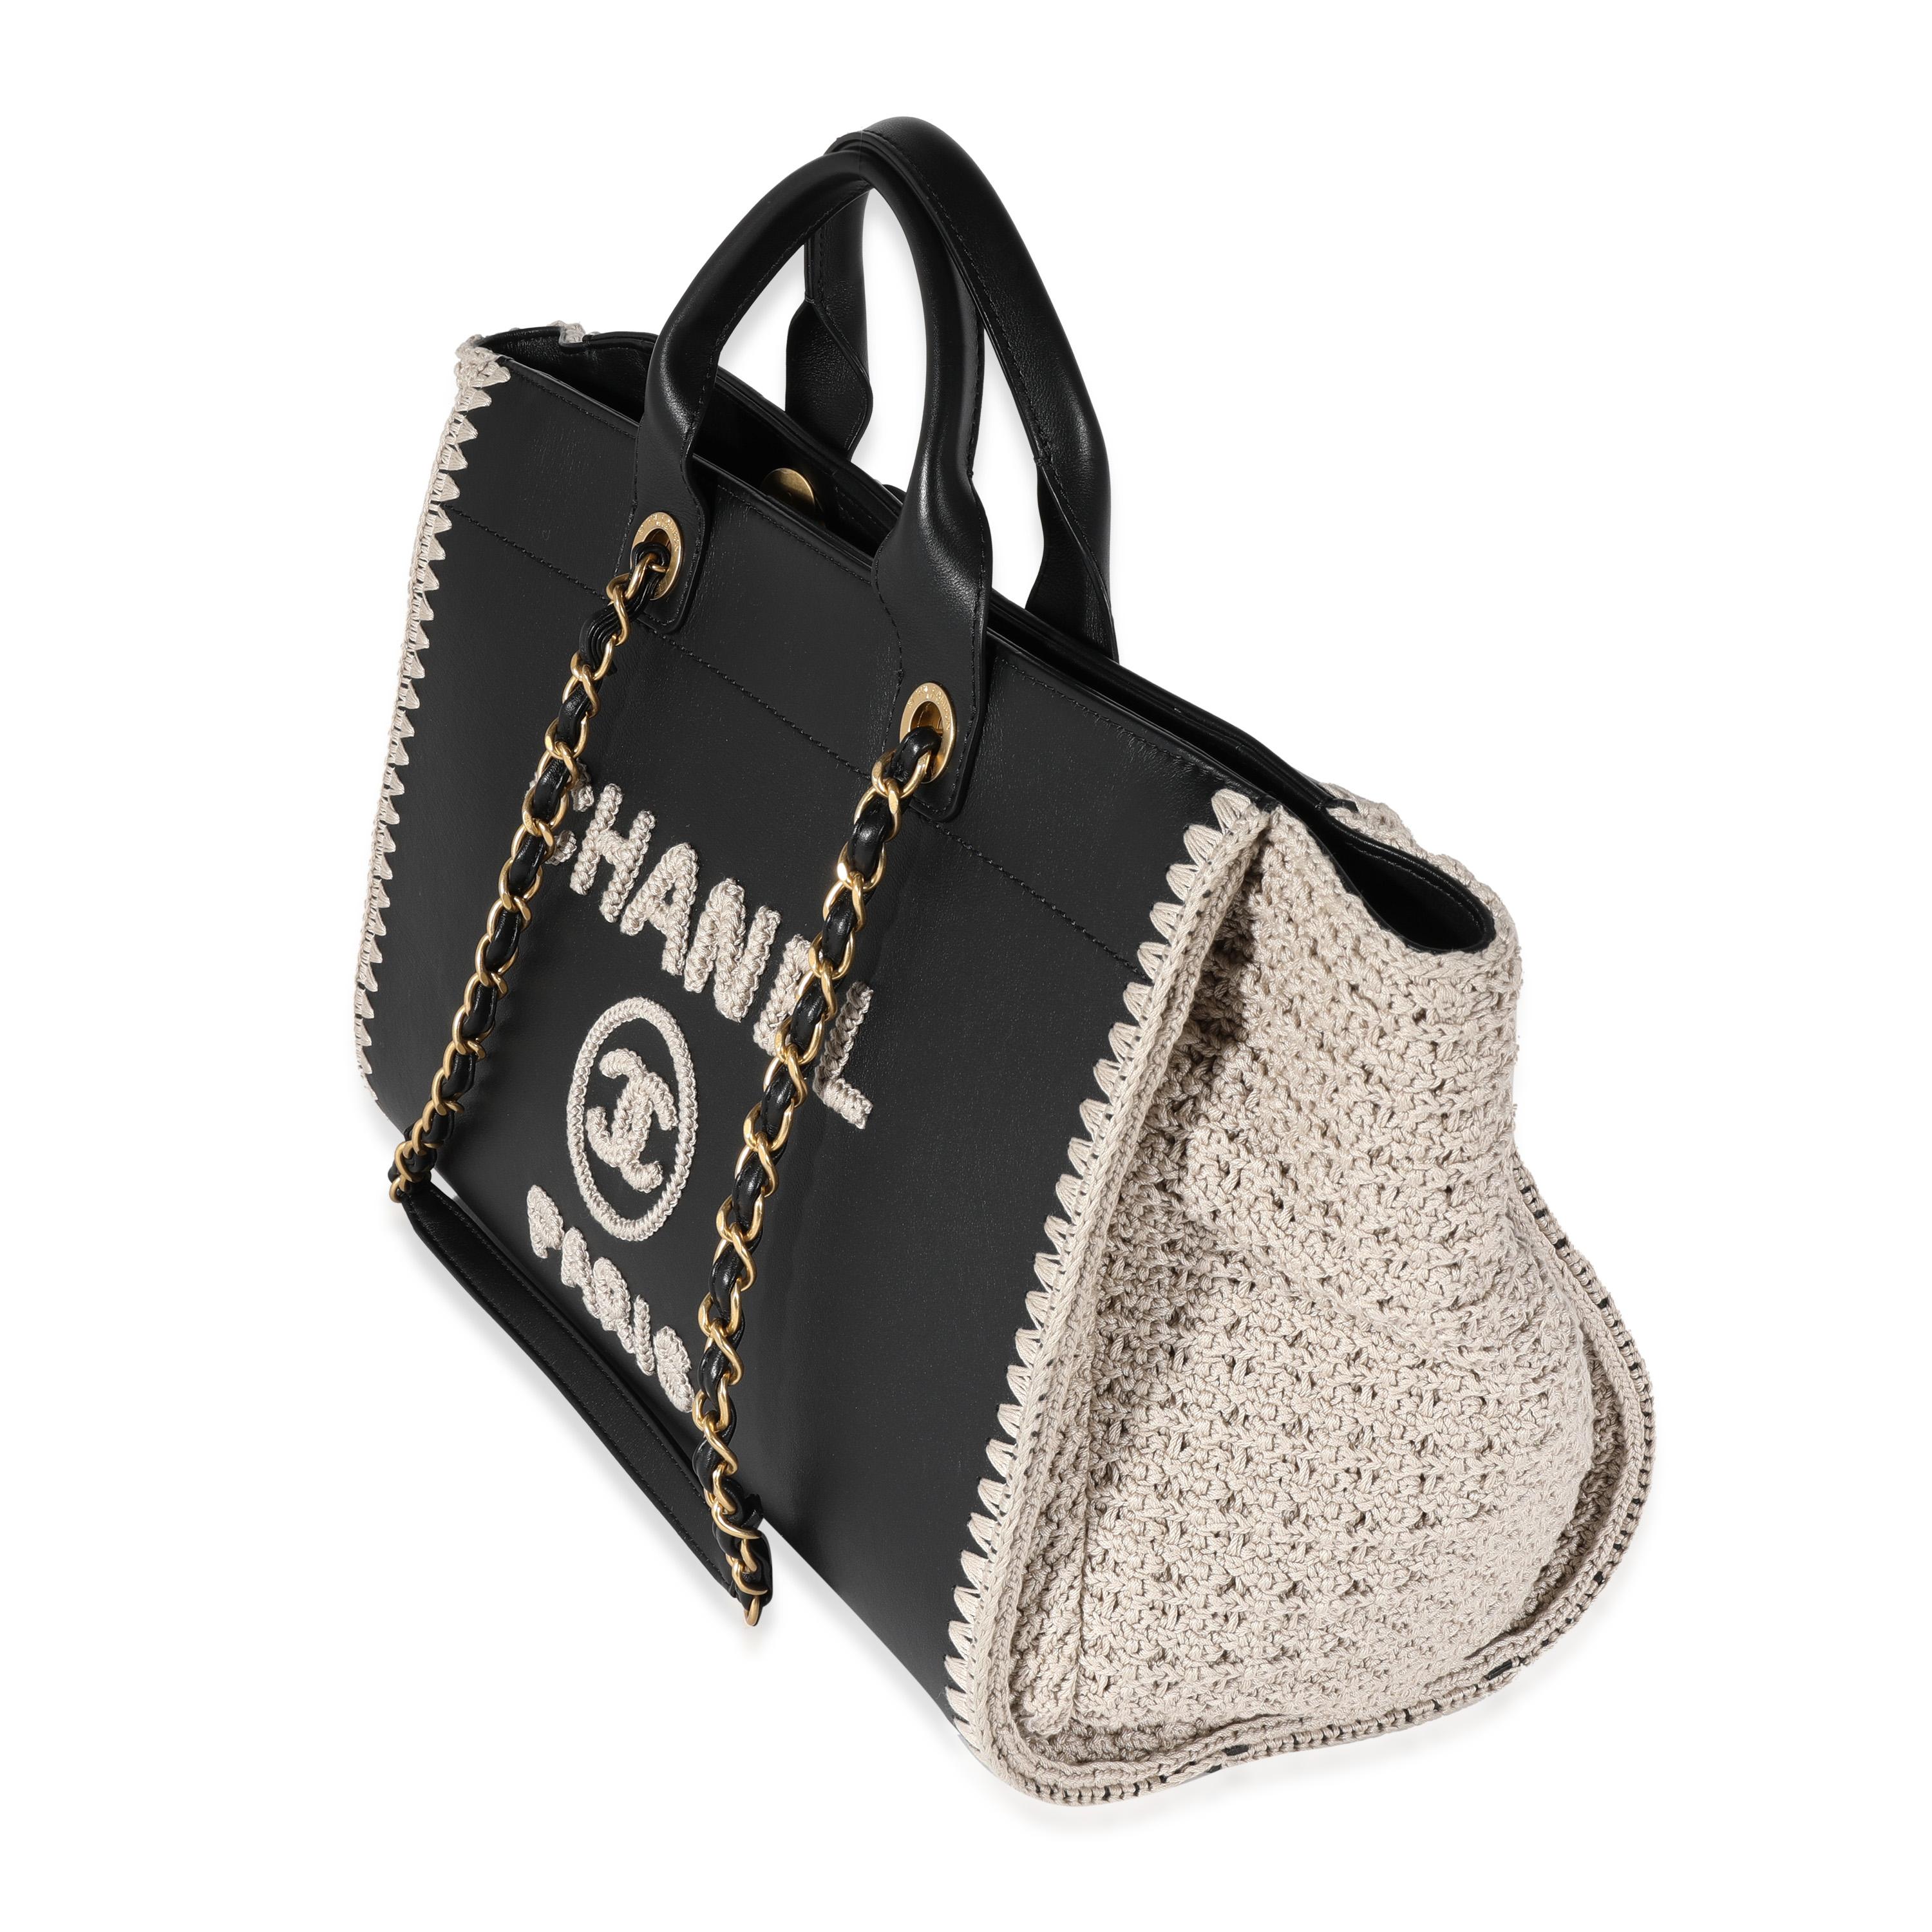 Listing Title: Chanel Black Leather & Beige Crochet Large Deauville Tote
SKU: 122056
Condition: Pre-owned 
Handbag Condition: Very Good
Condition Comments: Very Good Condition. Light scuffing to leather. Scratching and tarnishing to hardware. Light